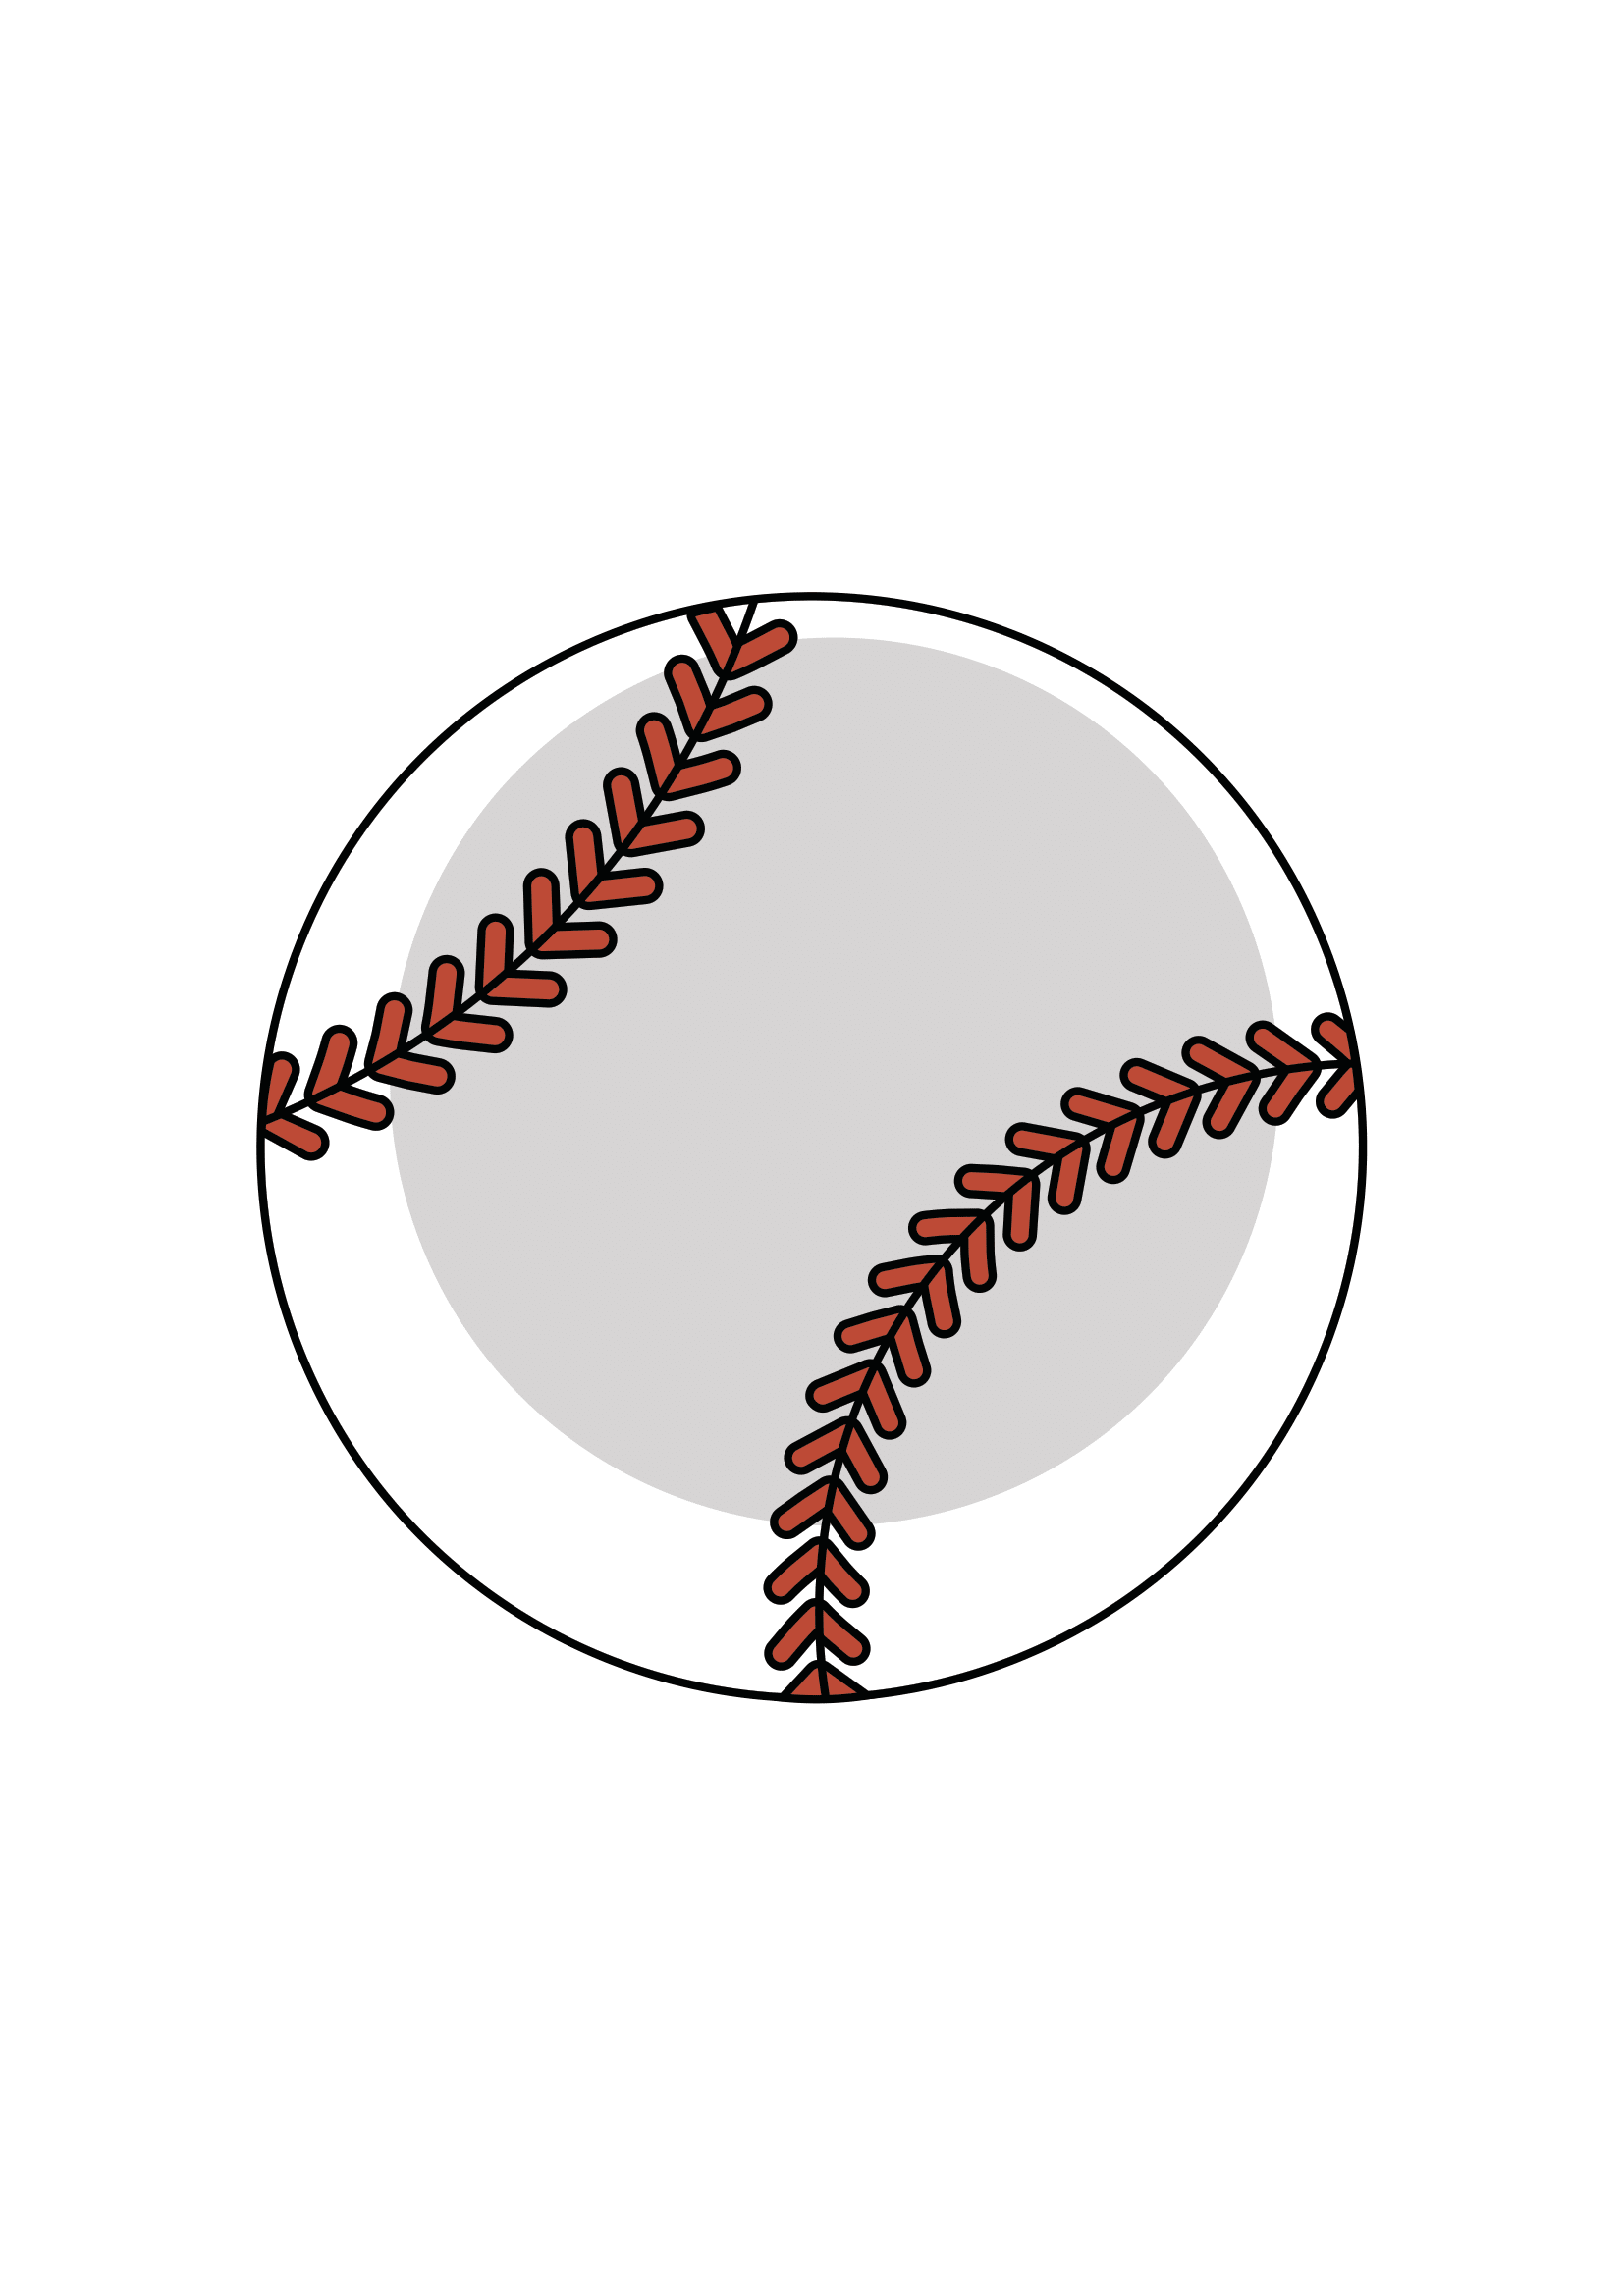 How to Draw A Baseball Step by Step Printable